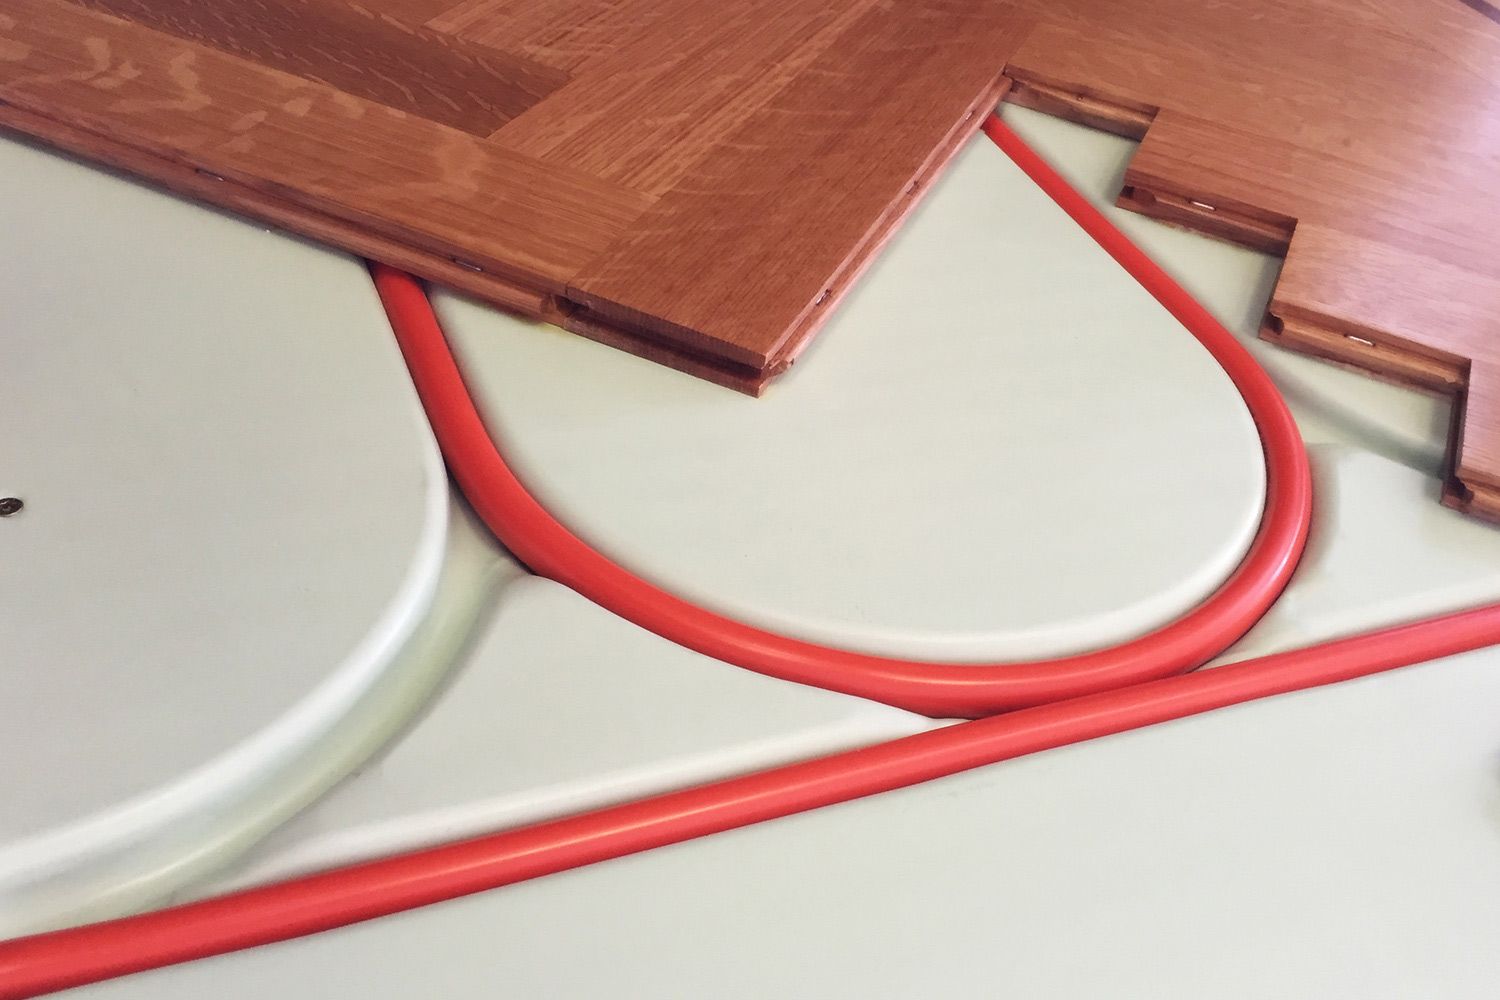 Electric Floor Heating How To Install, Can You Install Engineered Hardwood Over Radiant Heat